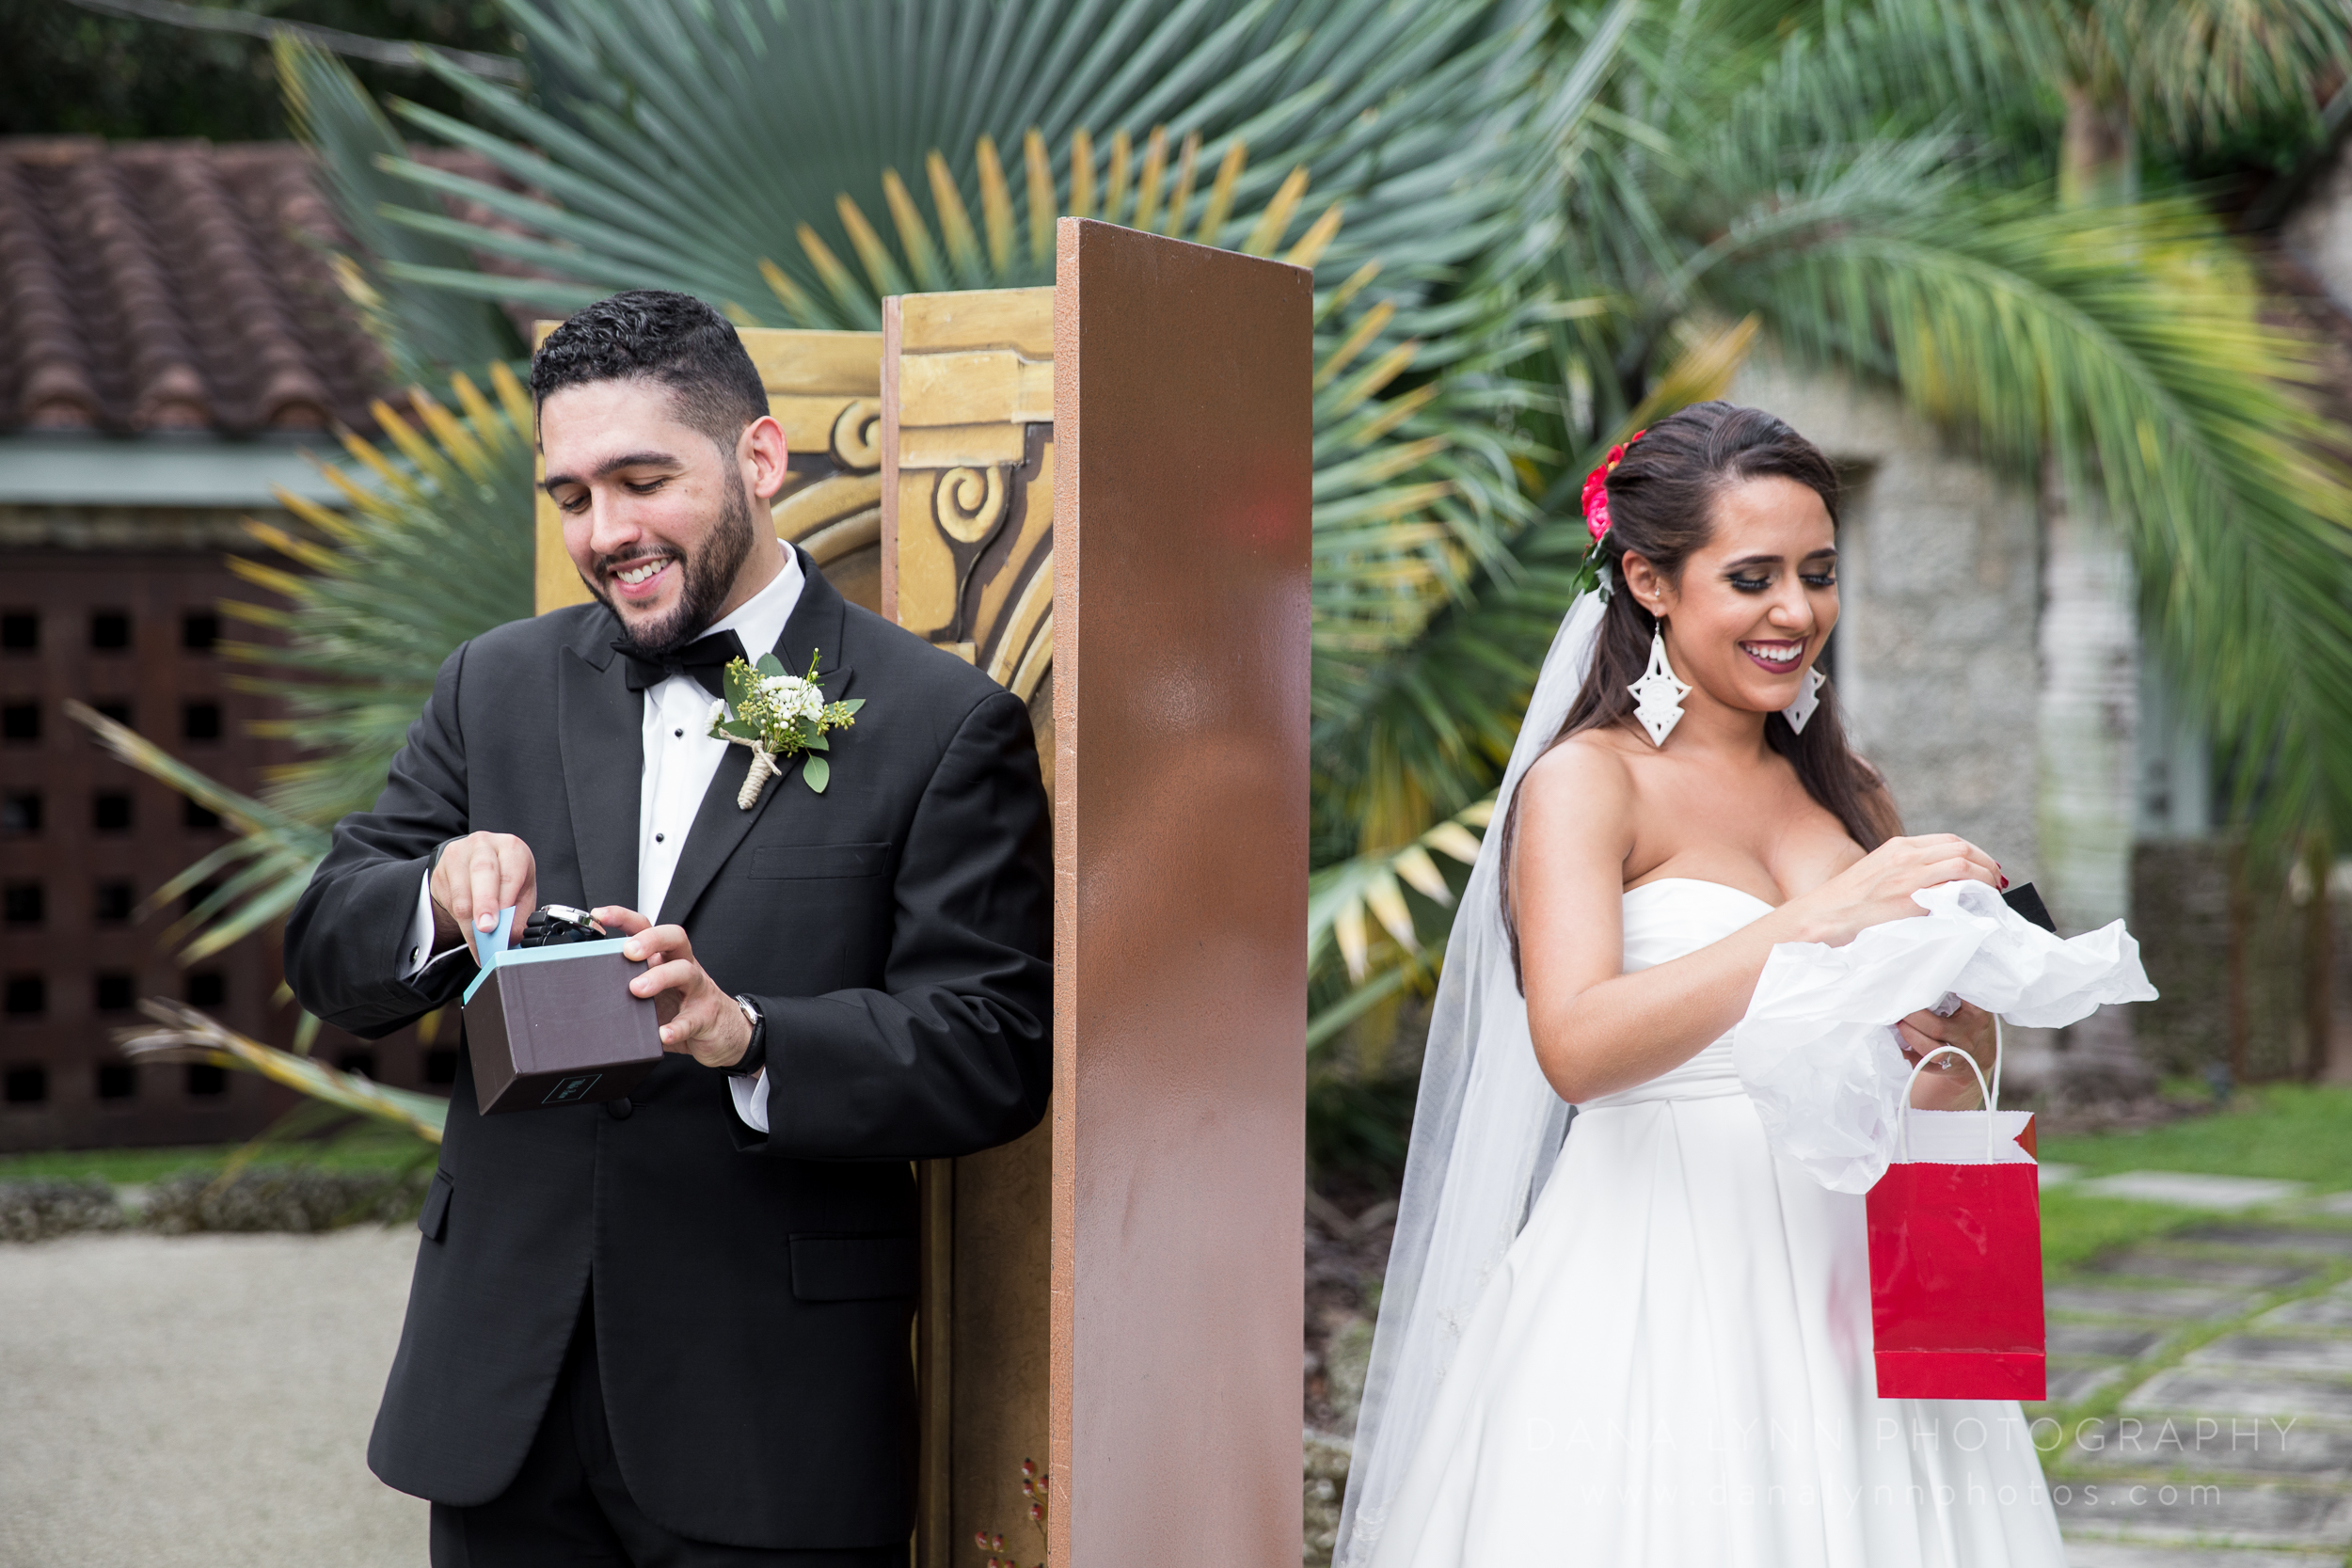 Wedding Photography at The Cooper Estate in Miami, FL